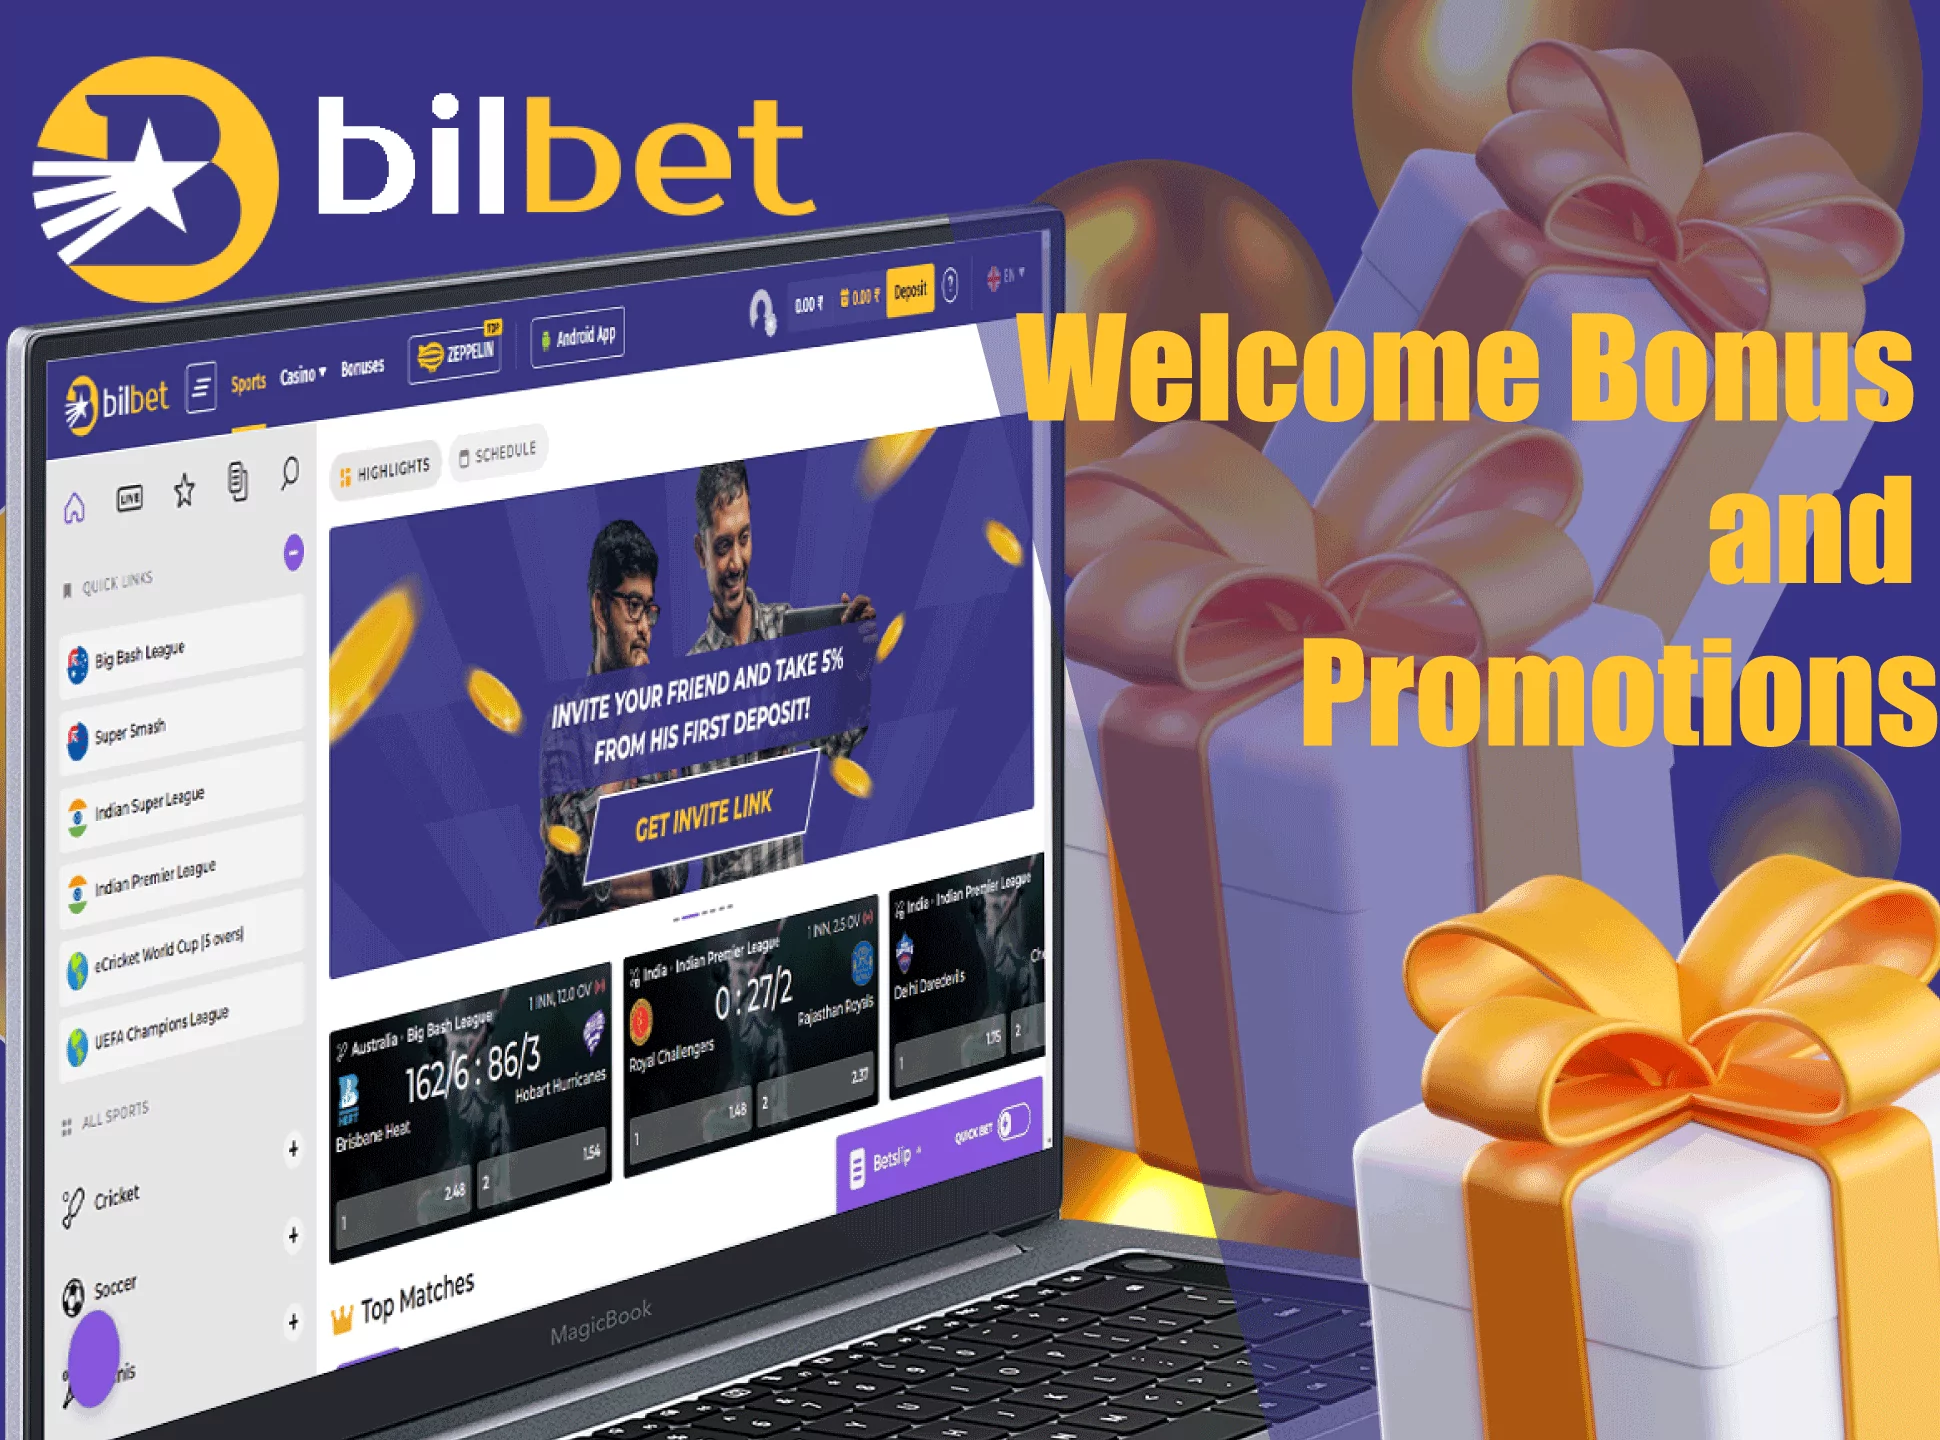 Every new user gets a lucrative welcome bonus fron Bilbet.